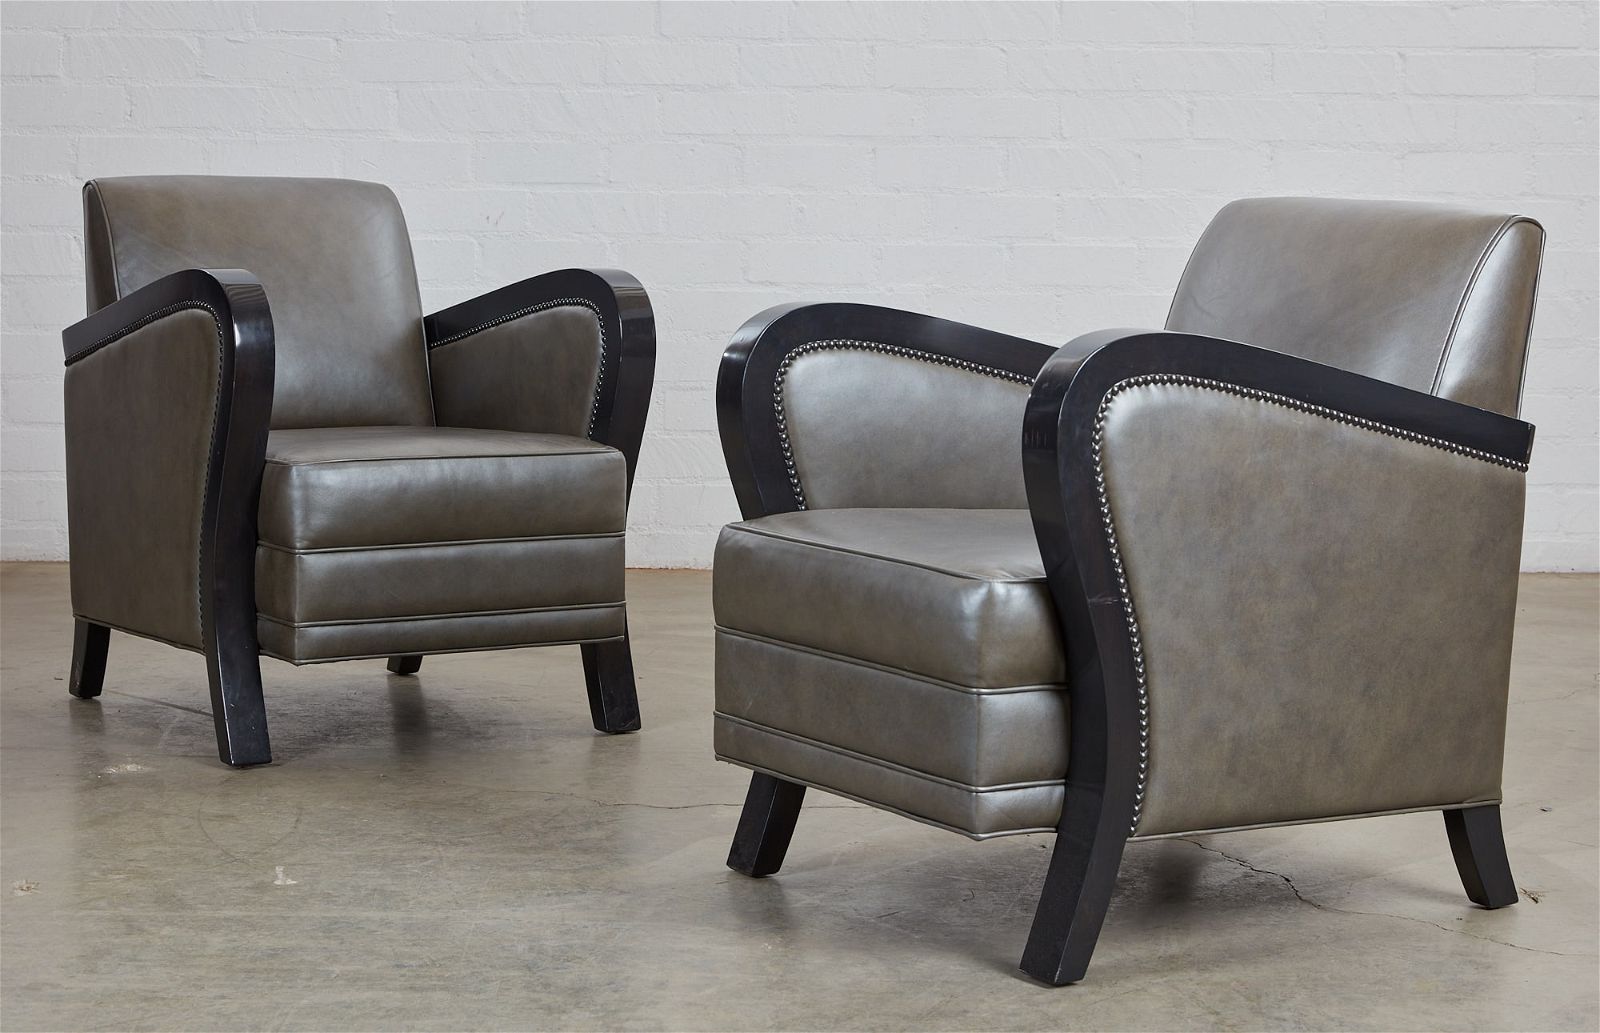 A PAIR OF DONGHIA ART DECO STYLE